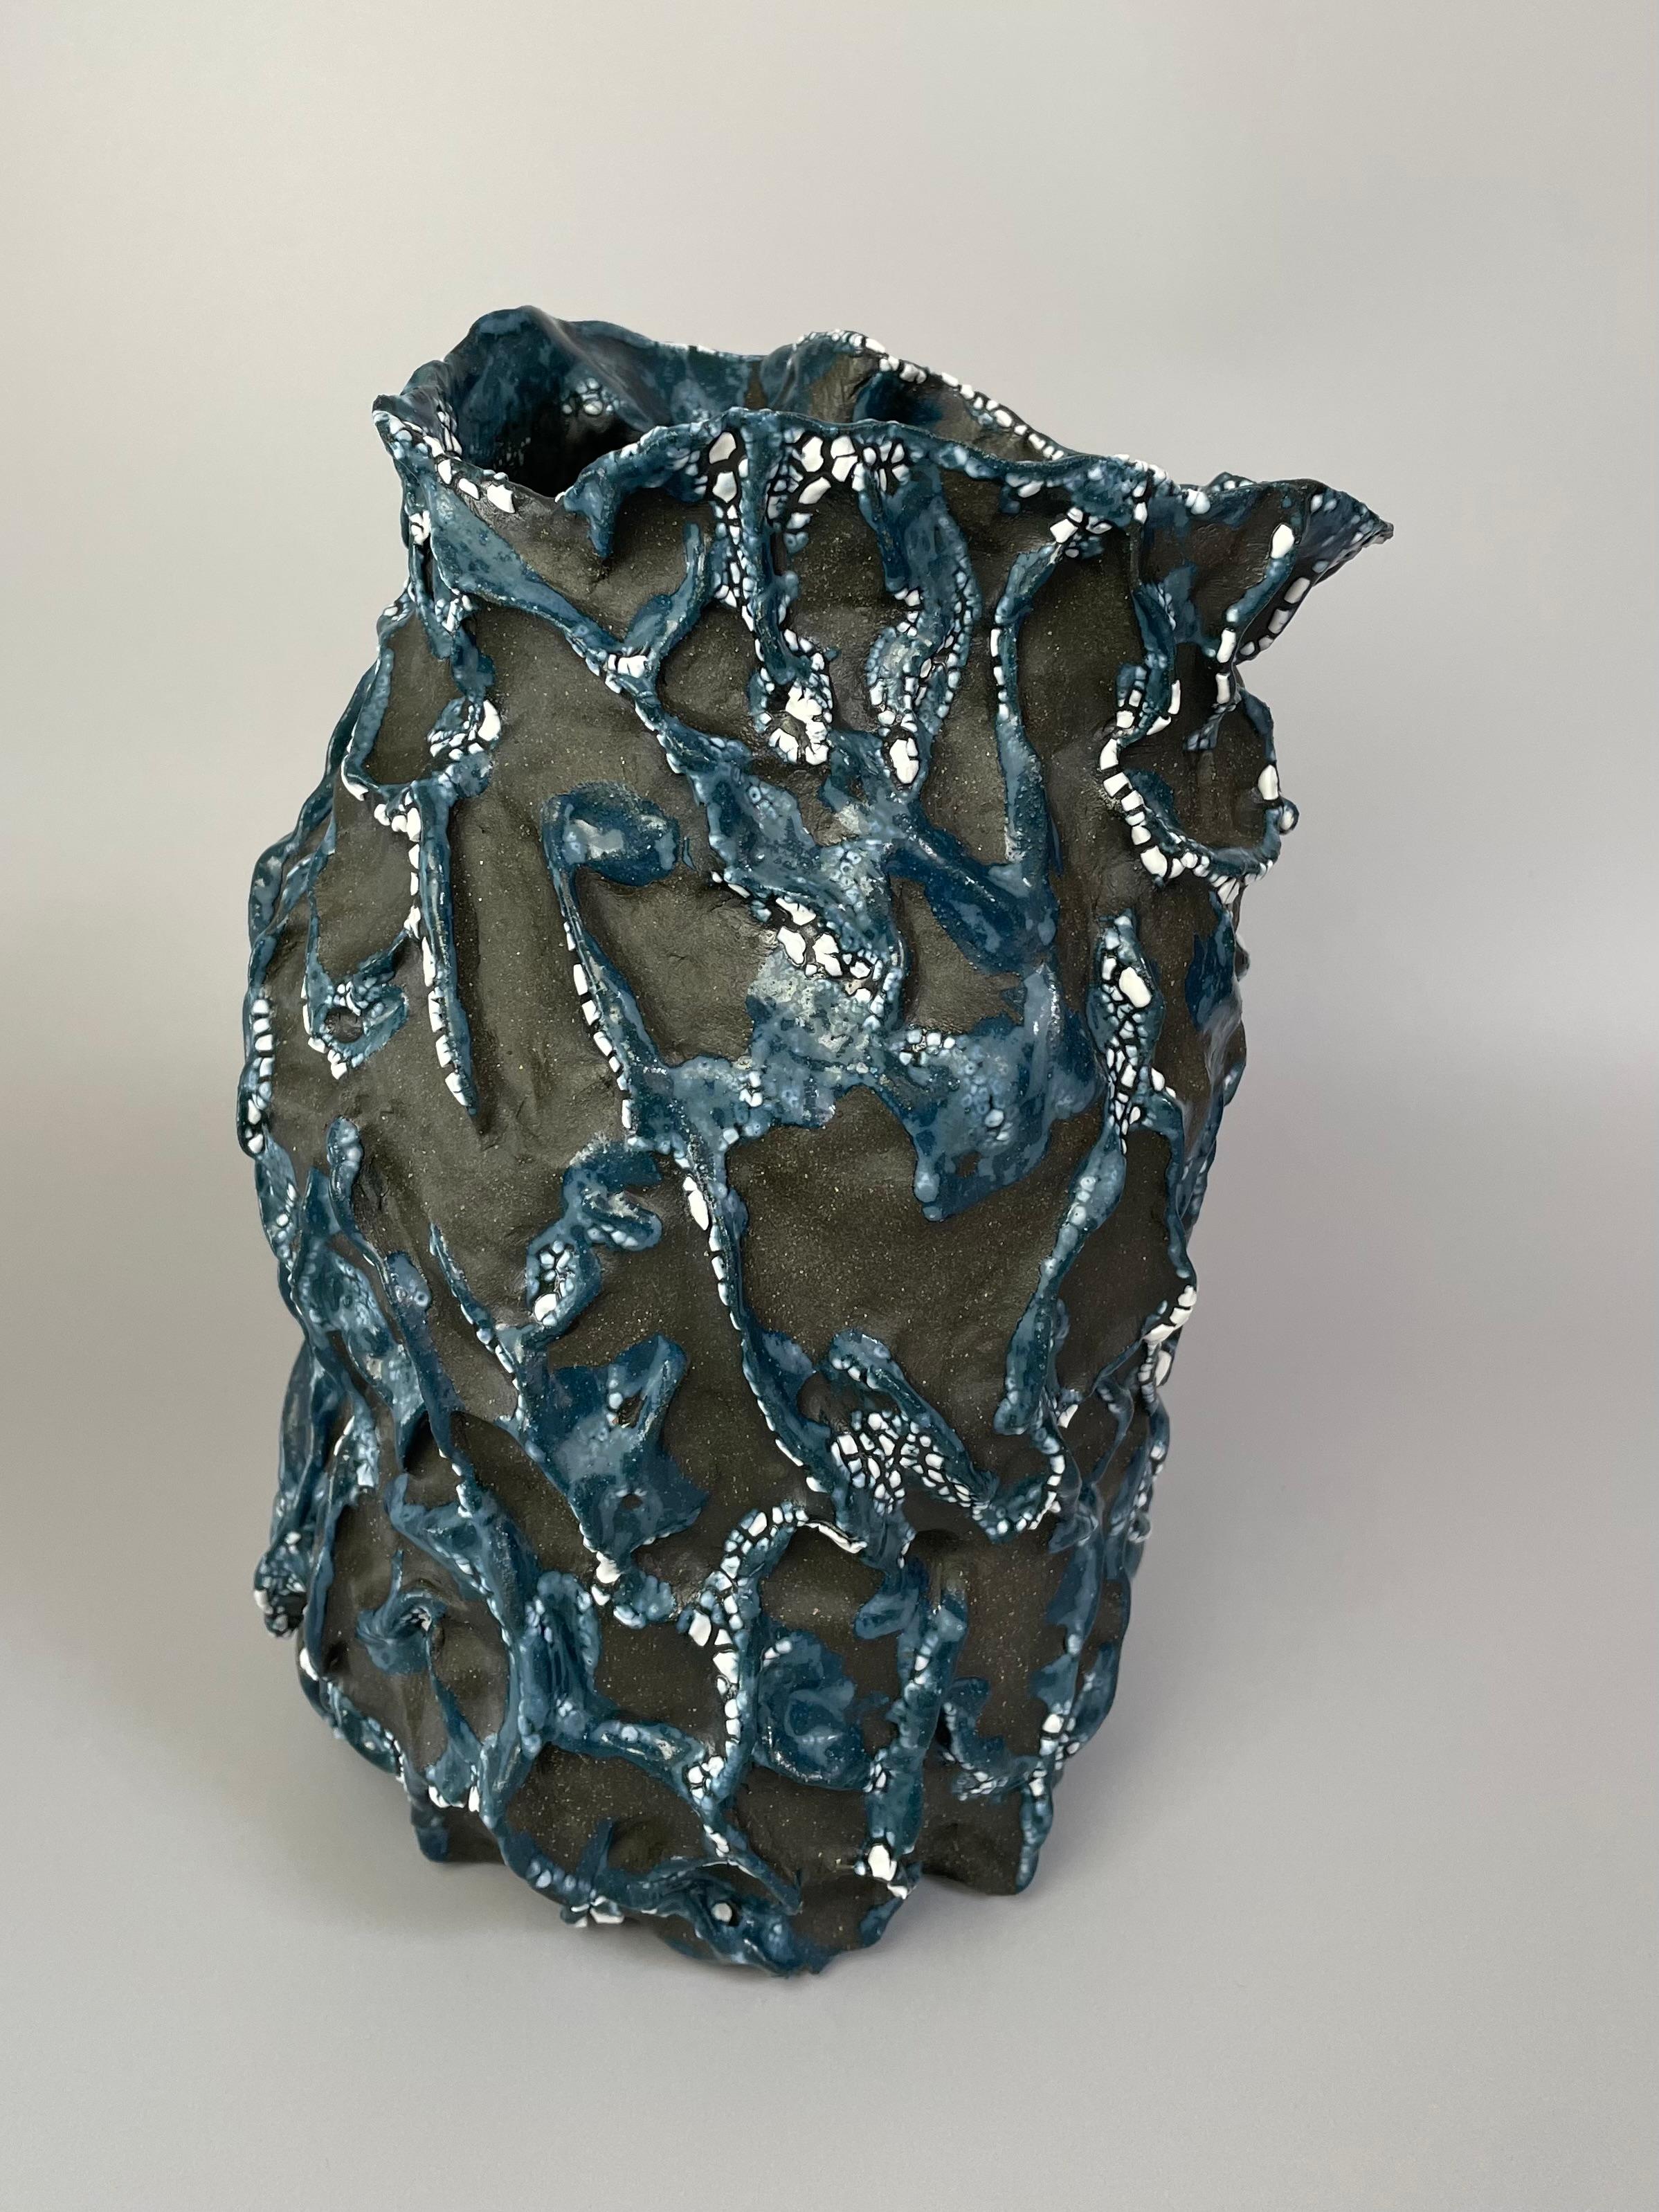 This ceramic vessel works both as a decorative piece on its own or can be used as a vase. I made this piece mixing a combination of porcelain paper clay with a black sable clay. I fired this piece to a cone 10 high fire and used minimal glazing to